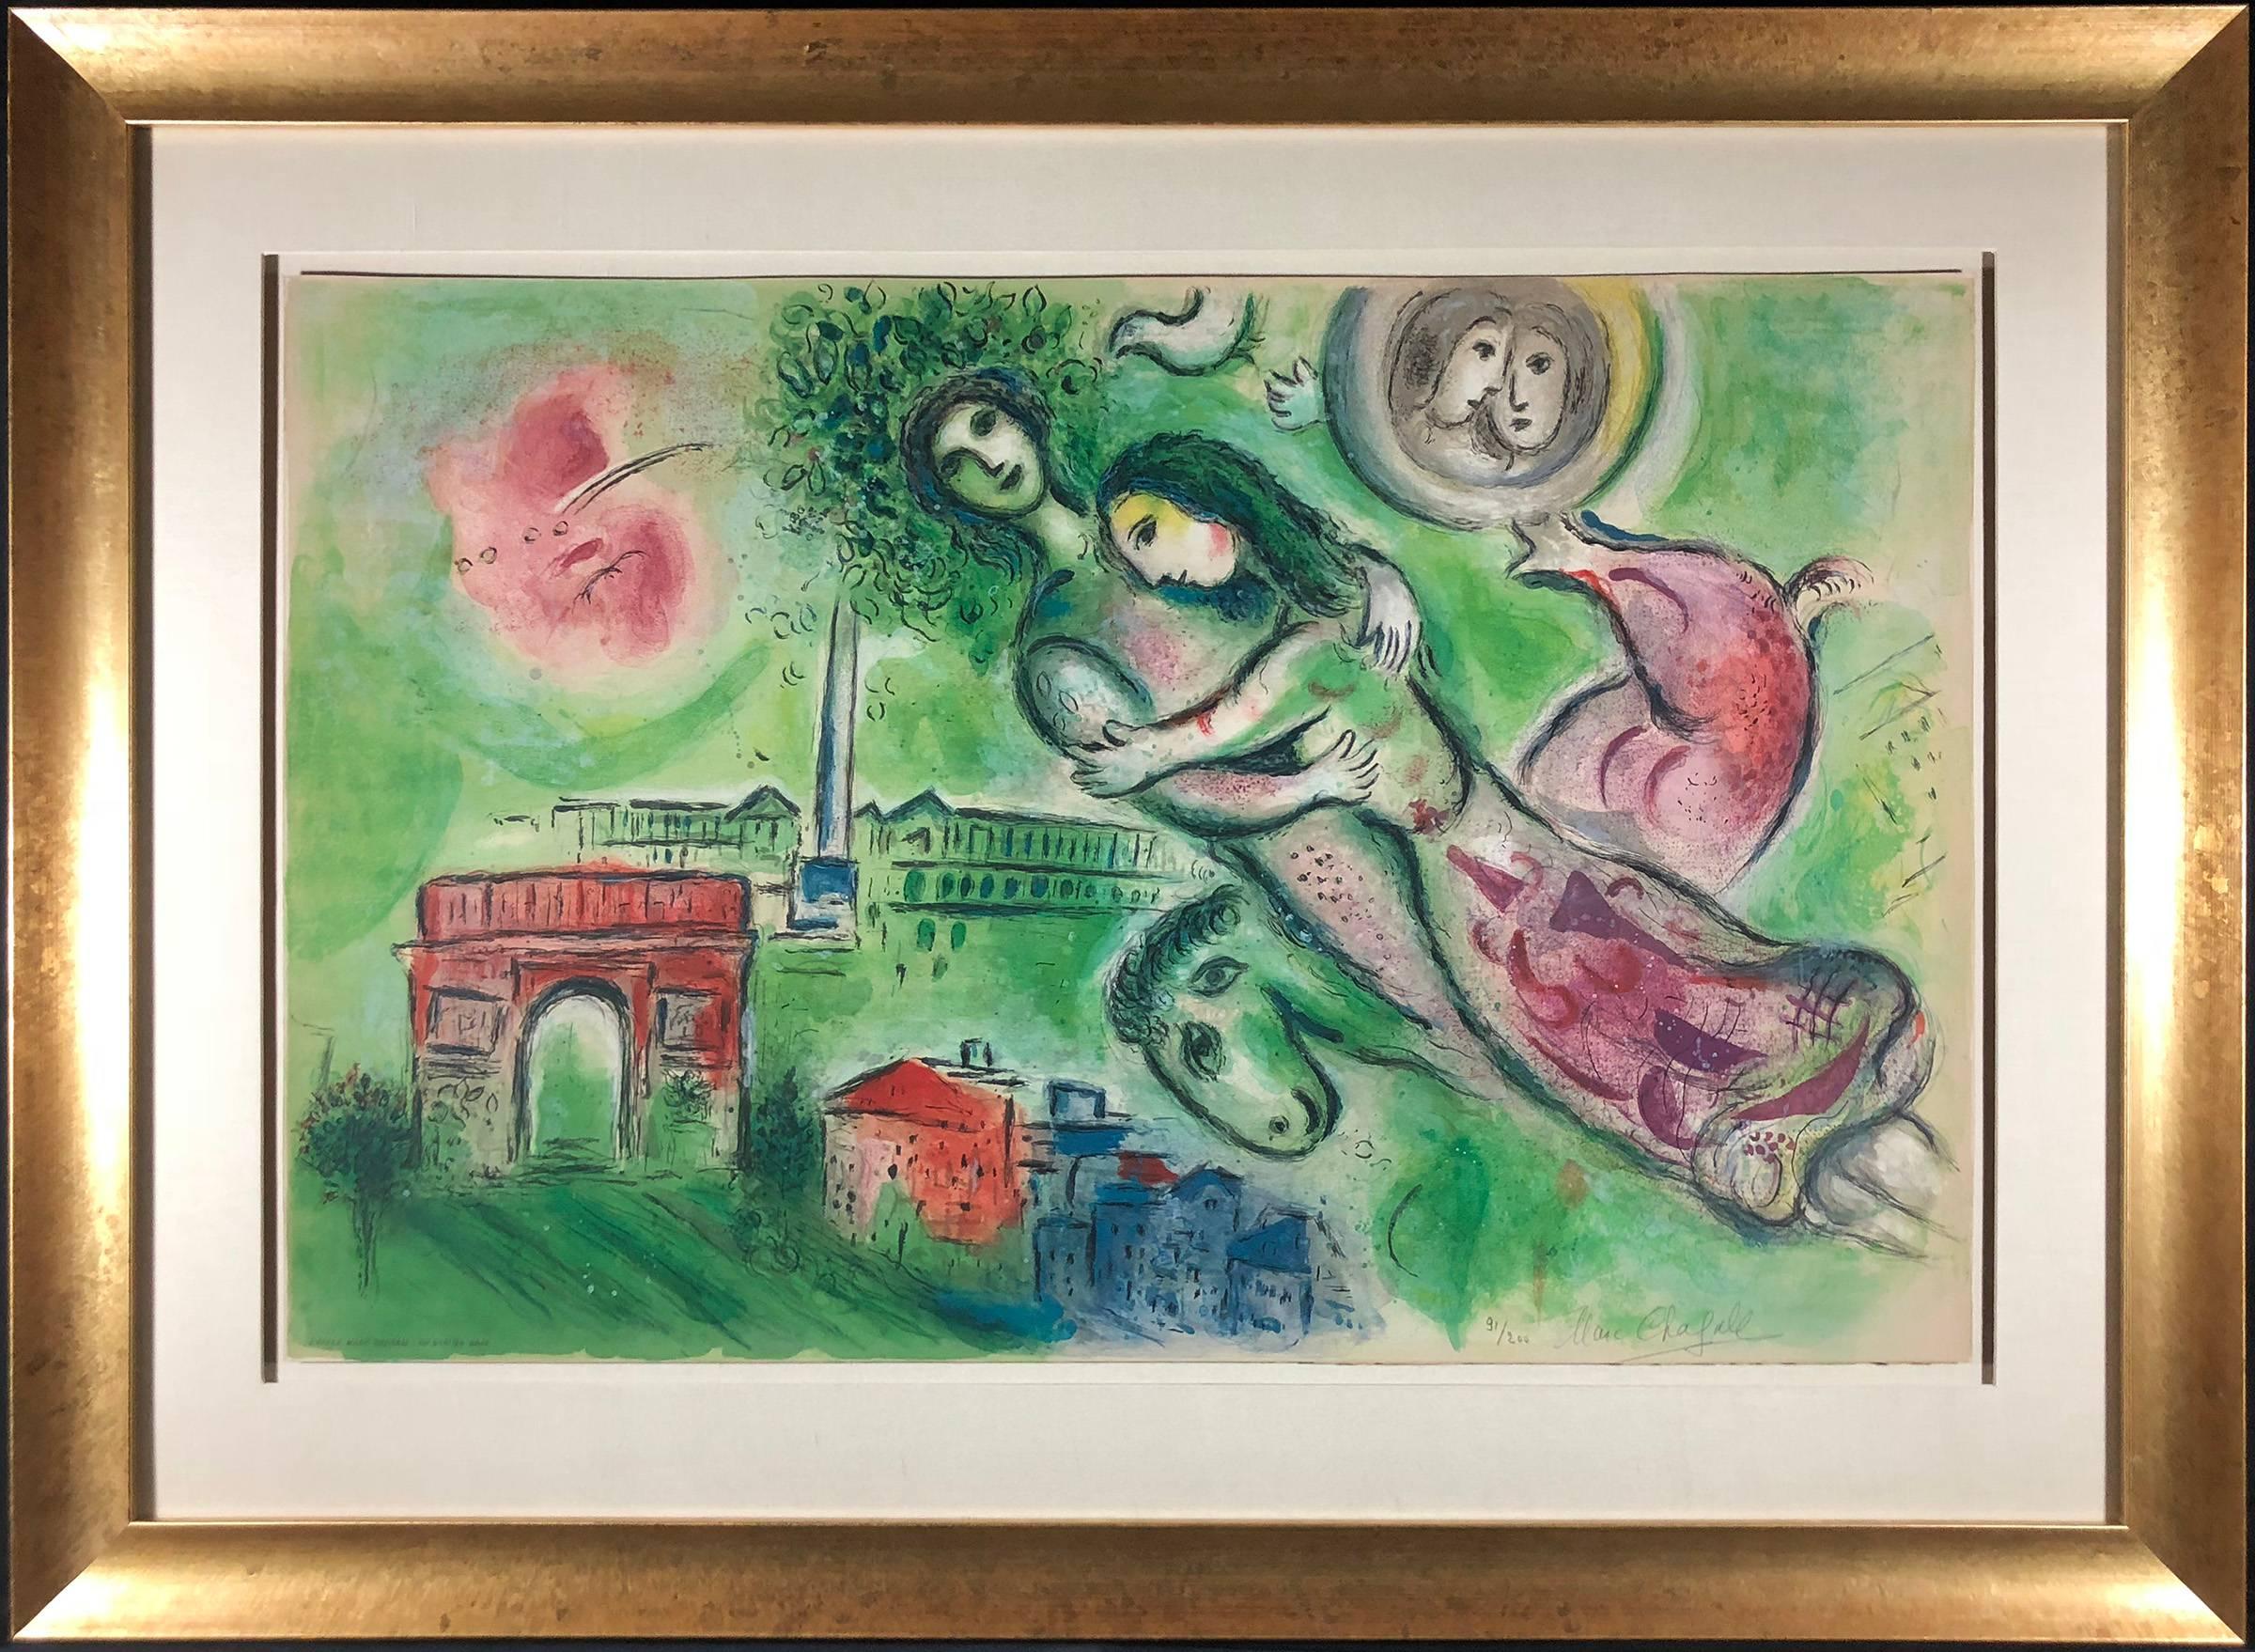 Romeo et Juliette (Signed) - Print by (after) Marc Chagall